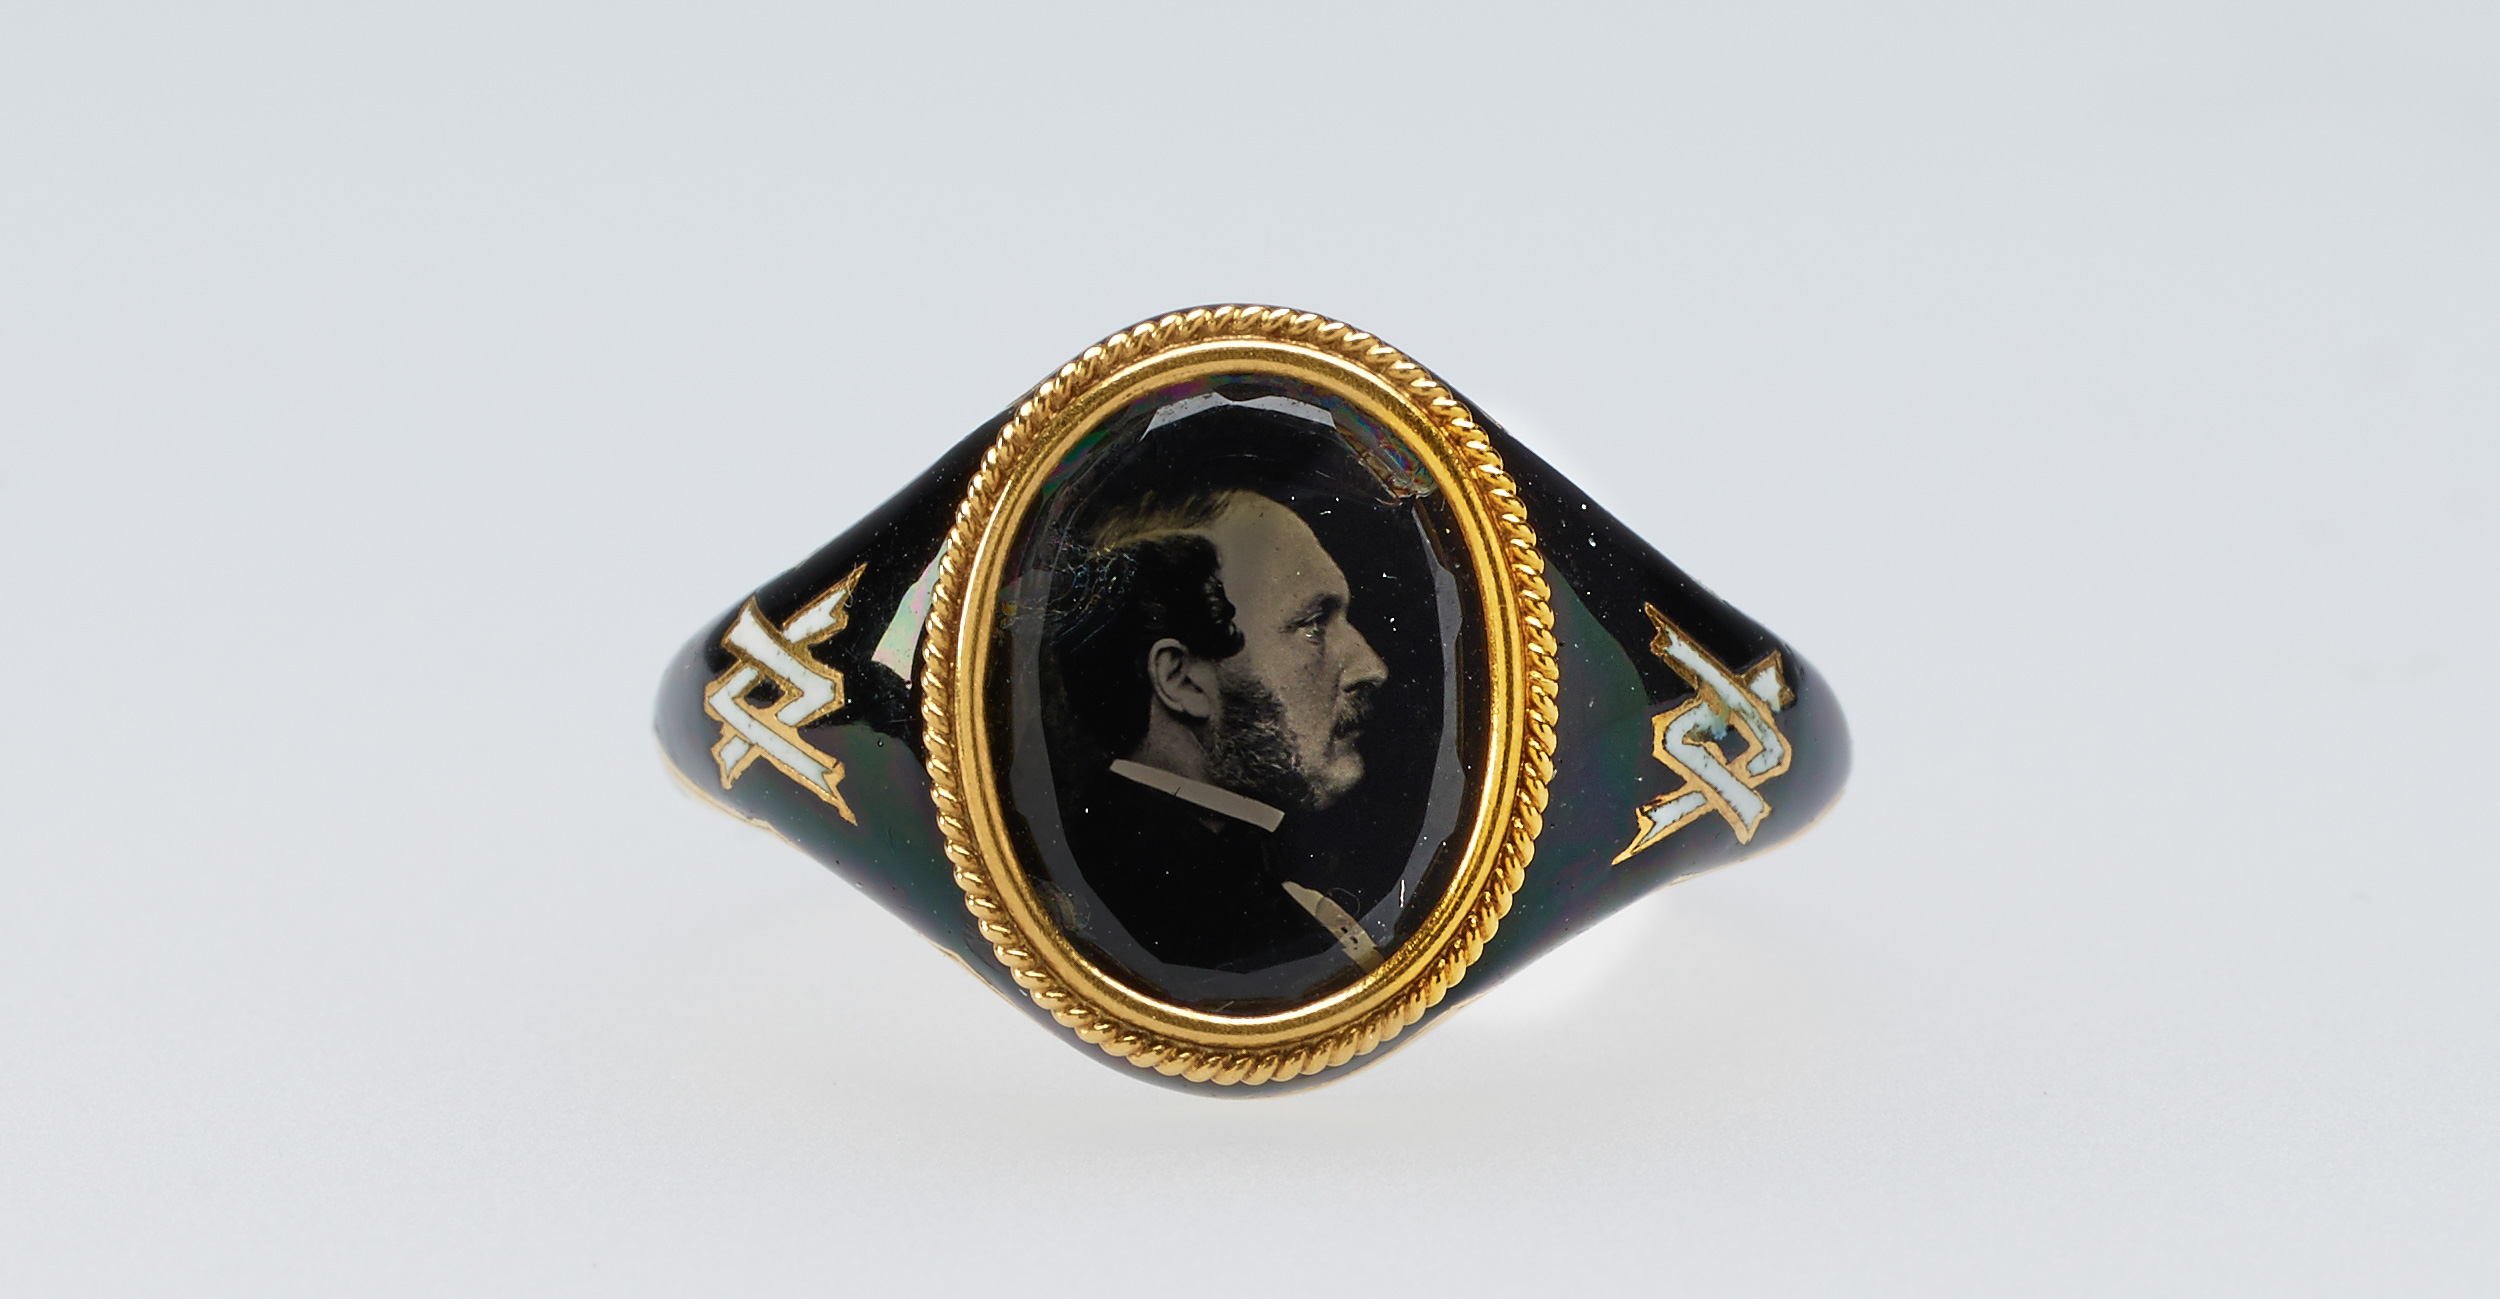 A ring featuring Albert's image